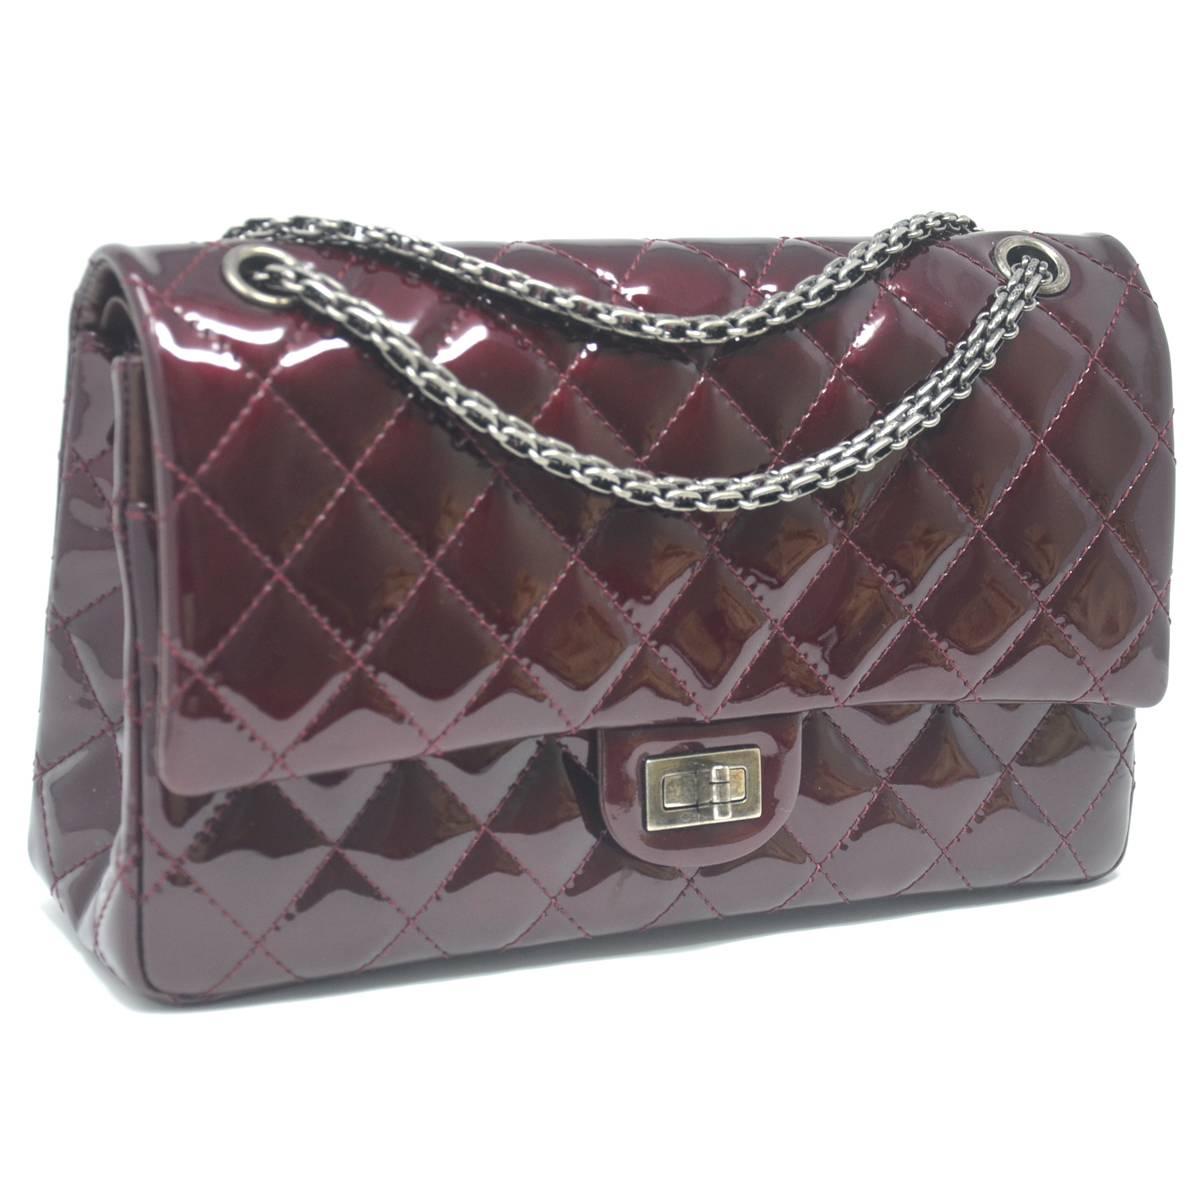 Company - Chanel
Model - Reissue 2.55 Classic
Color - Burgundy
Date Code - 14962085
Material - Patent Leather
Measurements - 11